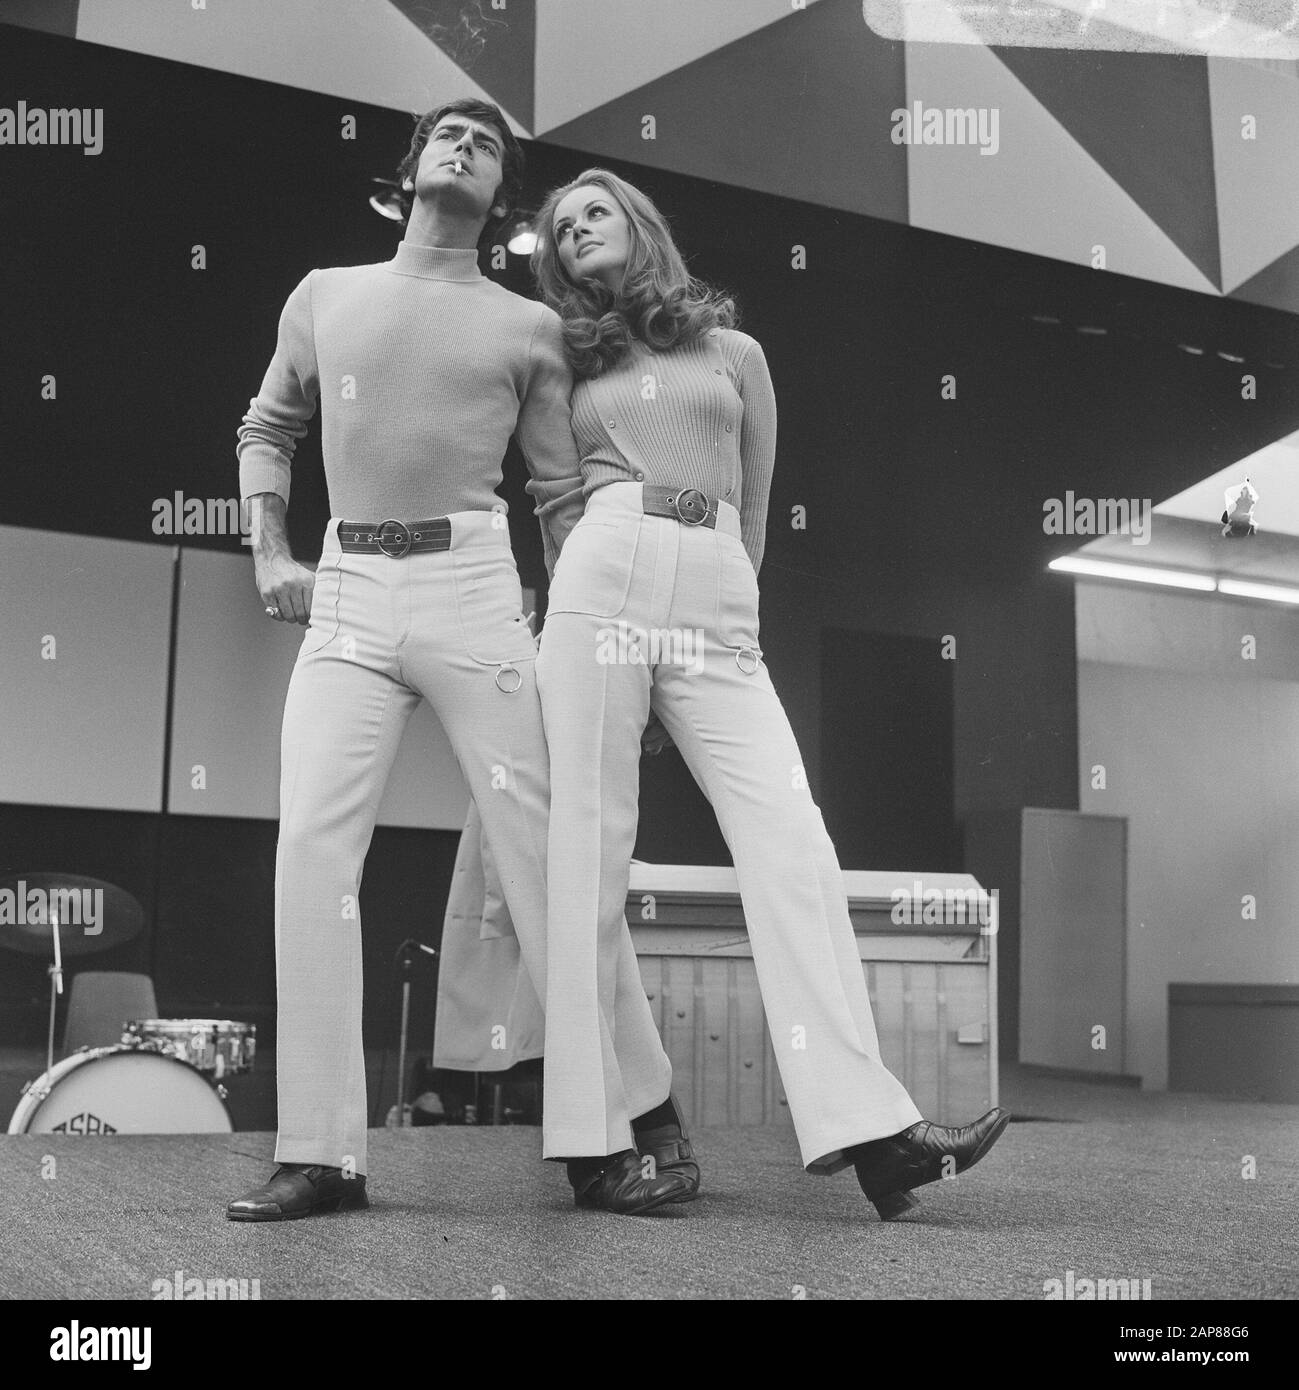 24th Men's fashion fair in RAI, Amsterdam: man and woman with the same  pants and jersey by B. Zuiderveen Date: September 1, 1969 Location:  Amsterdam, Noord-Holland Keywords: MODE, fairs Personal name: B.